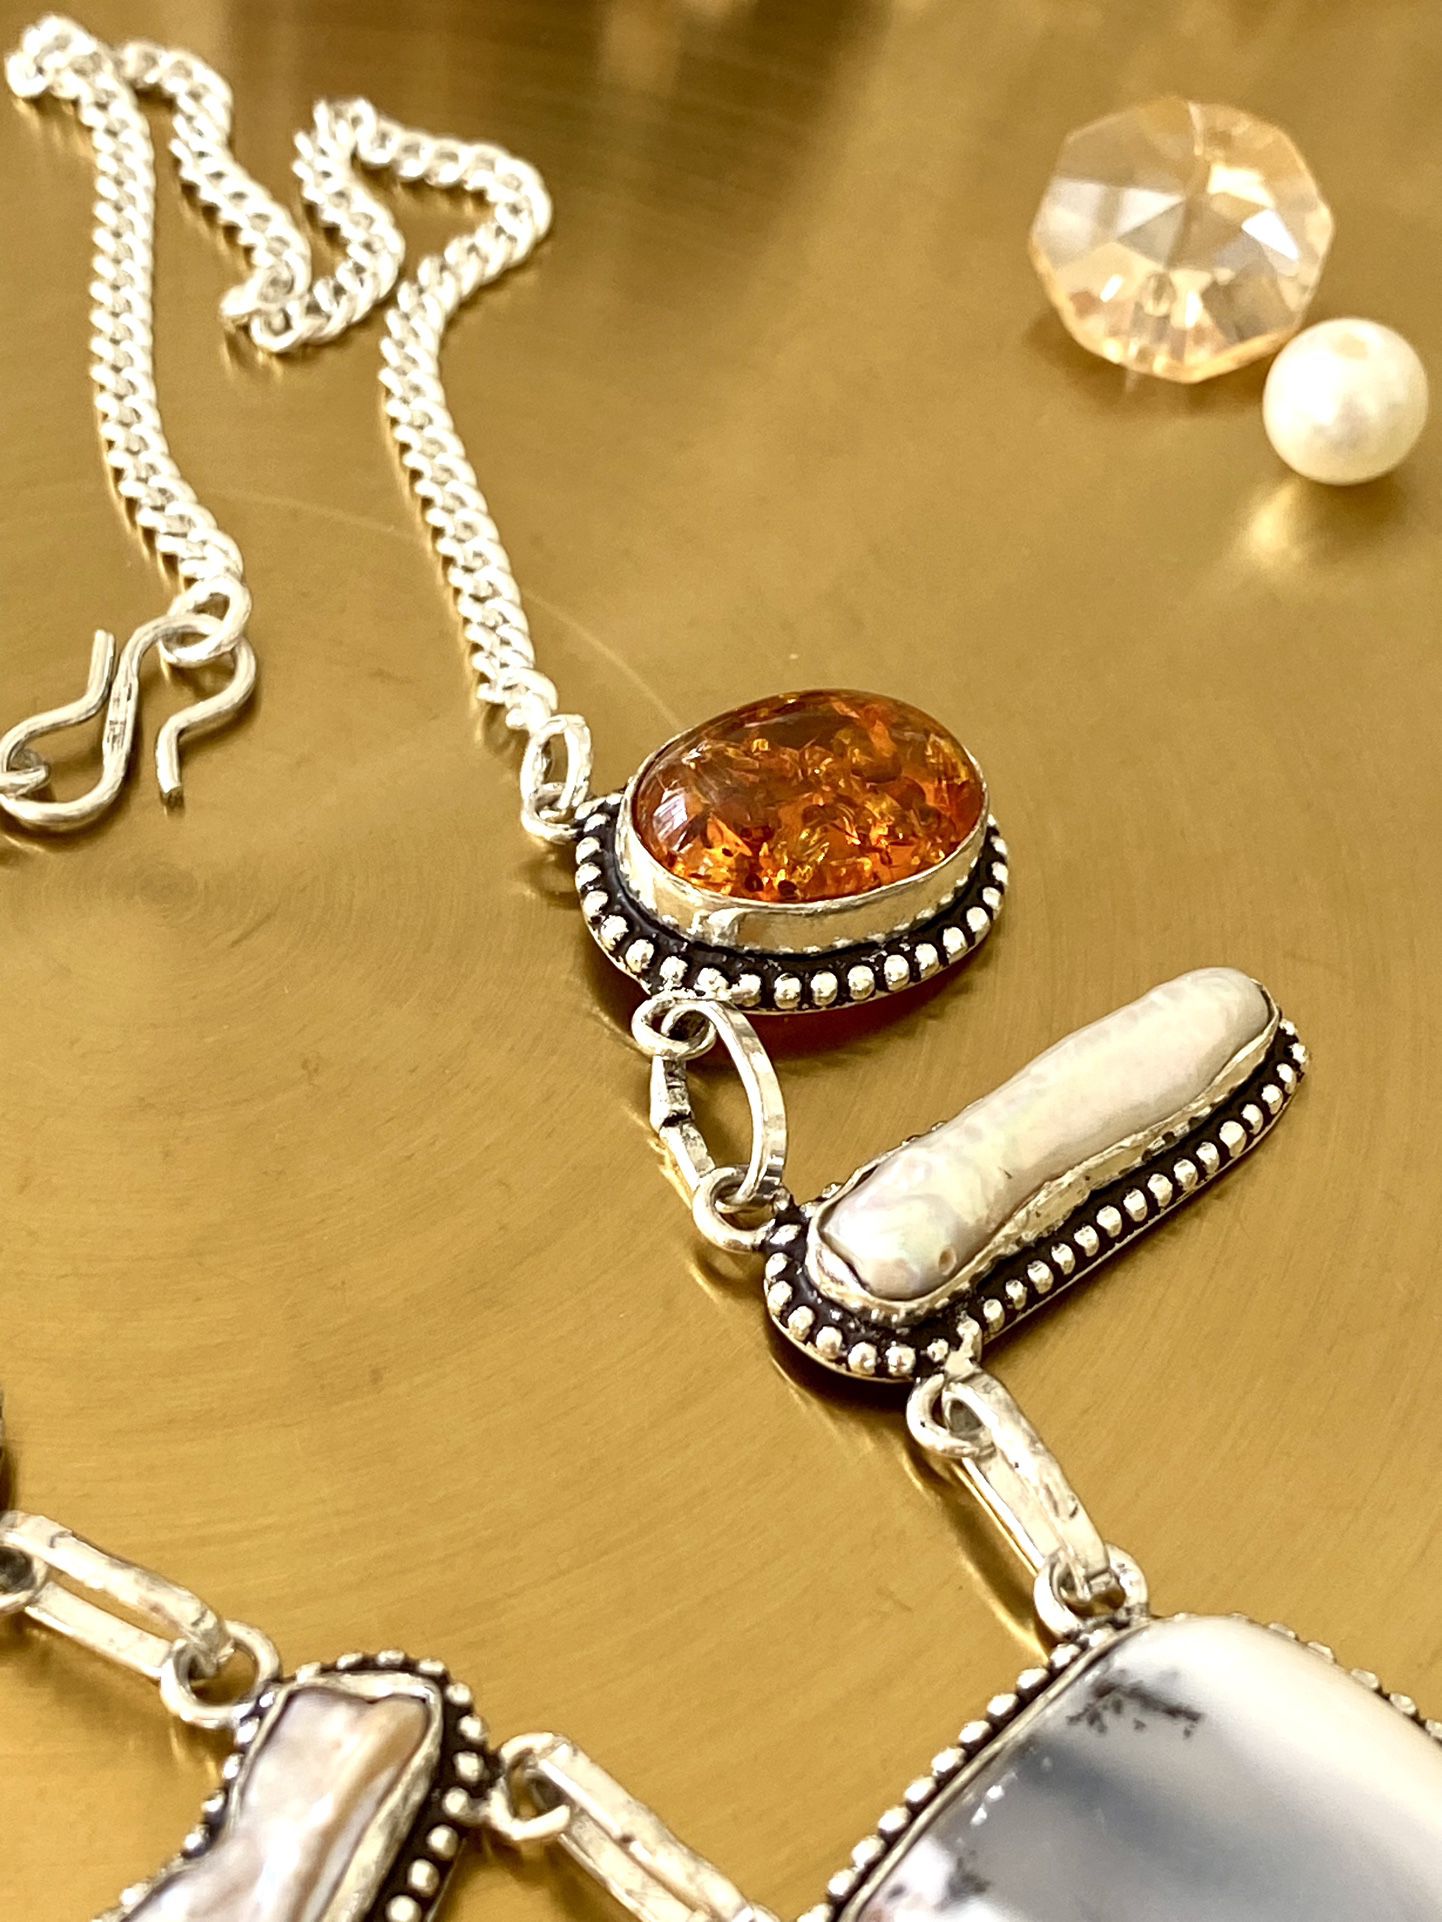 Dendrite Opal, Biwa Pearl And Baltic Amber 925 Sterling Silver Overlay Necklace